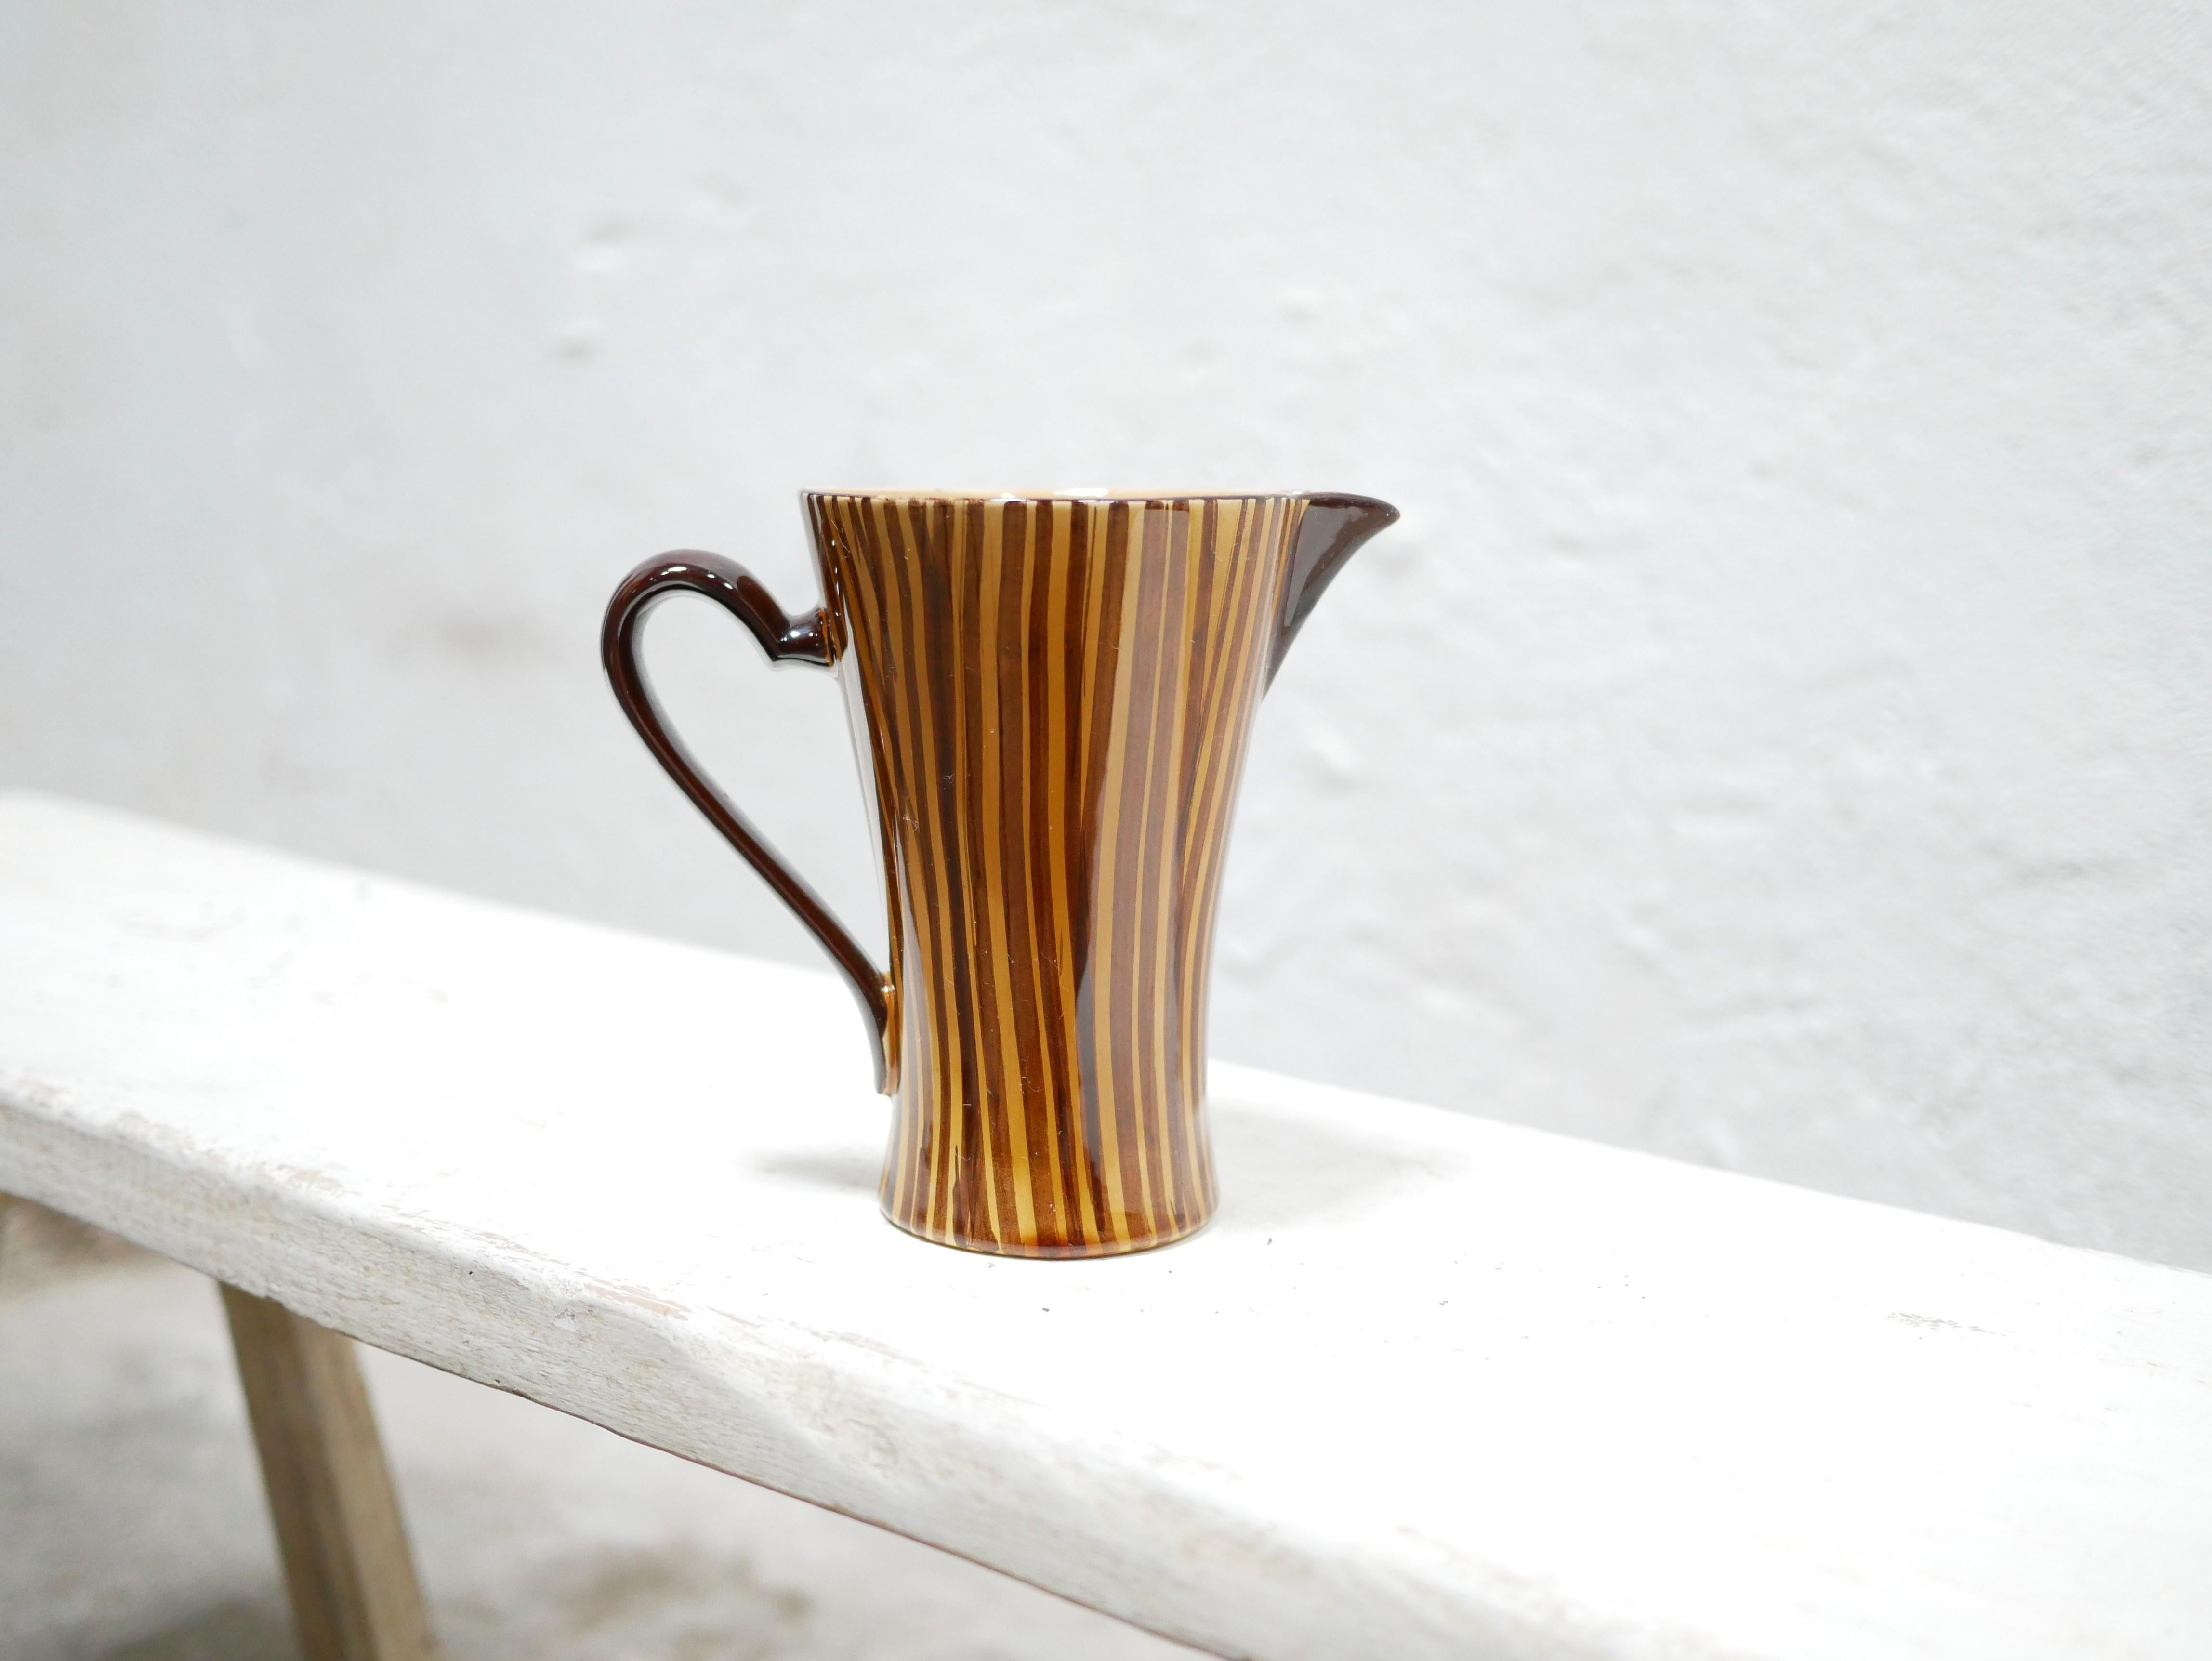 Ceramic pitcher designed by the Sarreguemines factory, France, in the 1960s.

With its modern shape and mineral hue, this ceramic will be perfect in a natural, refined and delicate decoration.
We simply imagine it placed on a shelf or piece of